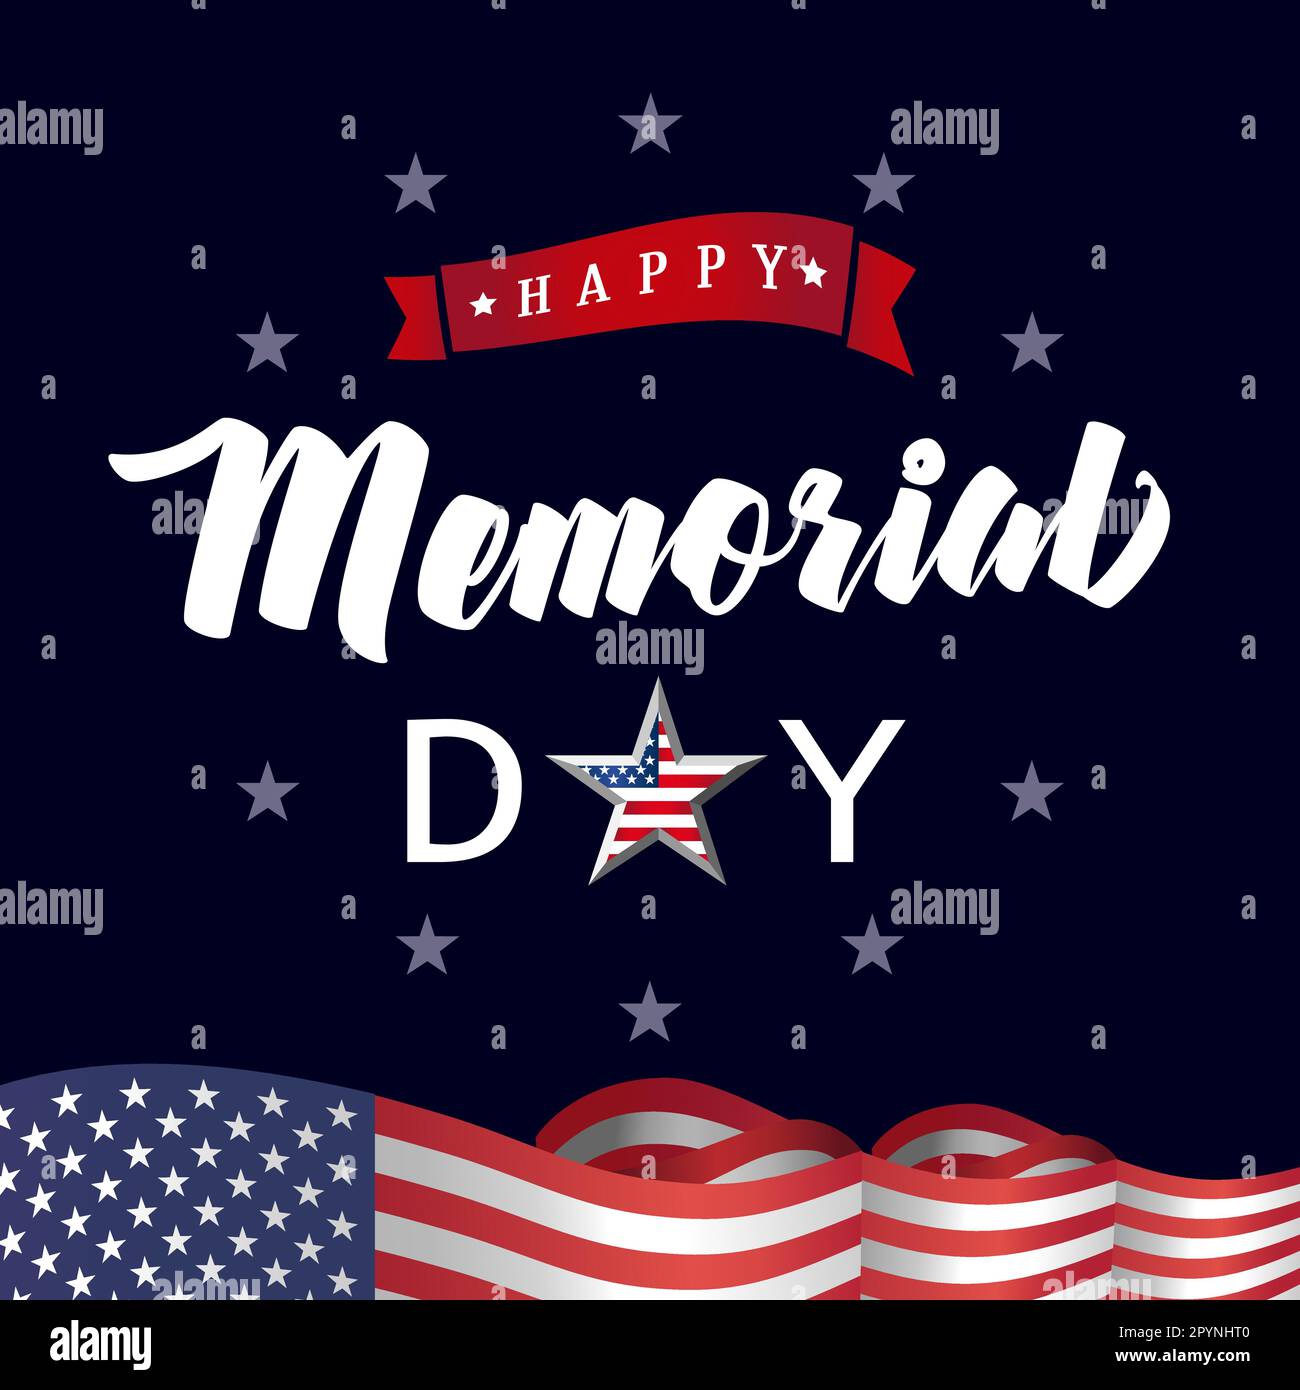 Happy Memorial Day creative banner. Typographic logo and 3D flag United States. Invitation design. Modern calligraphy. Isolated elements. Patriotic ba Stock Vector